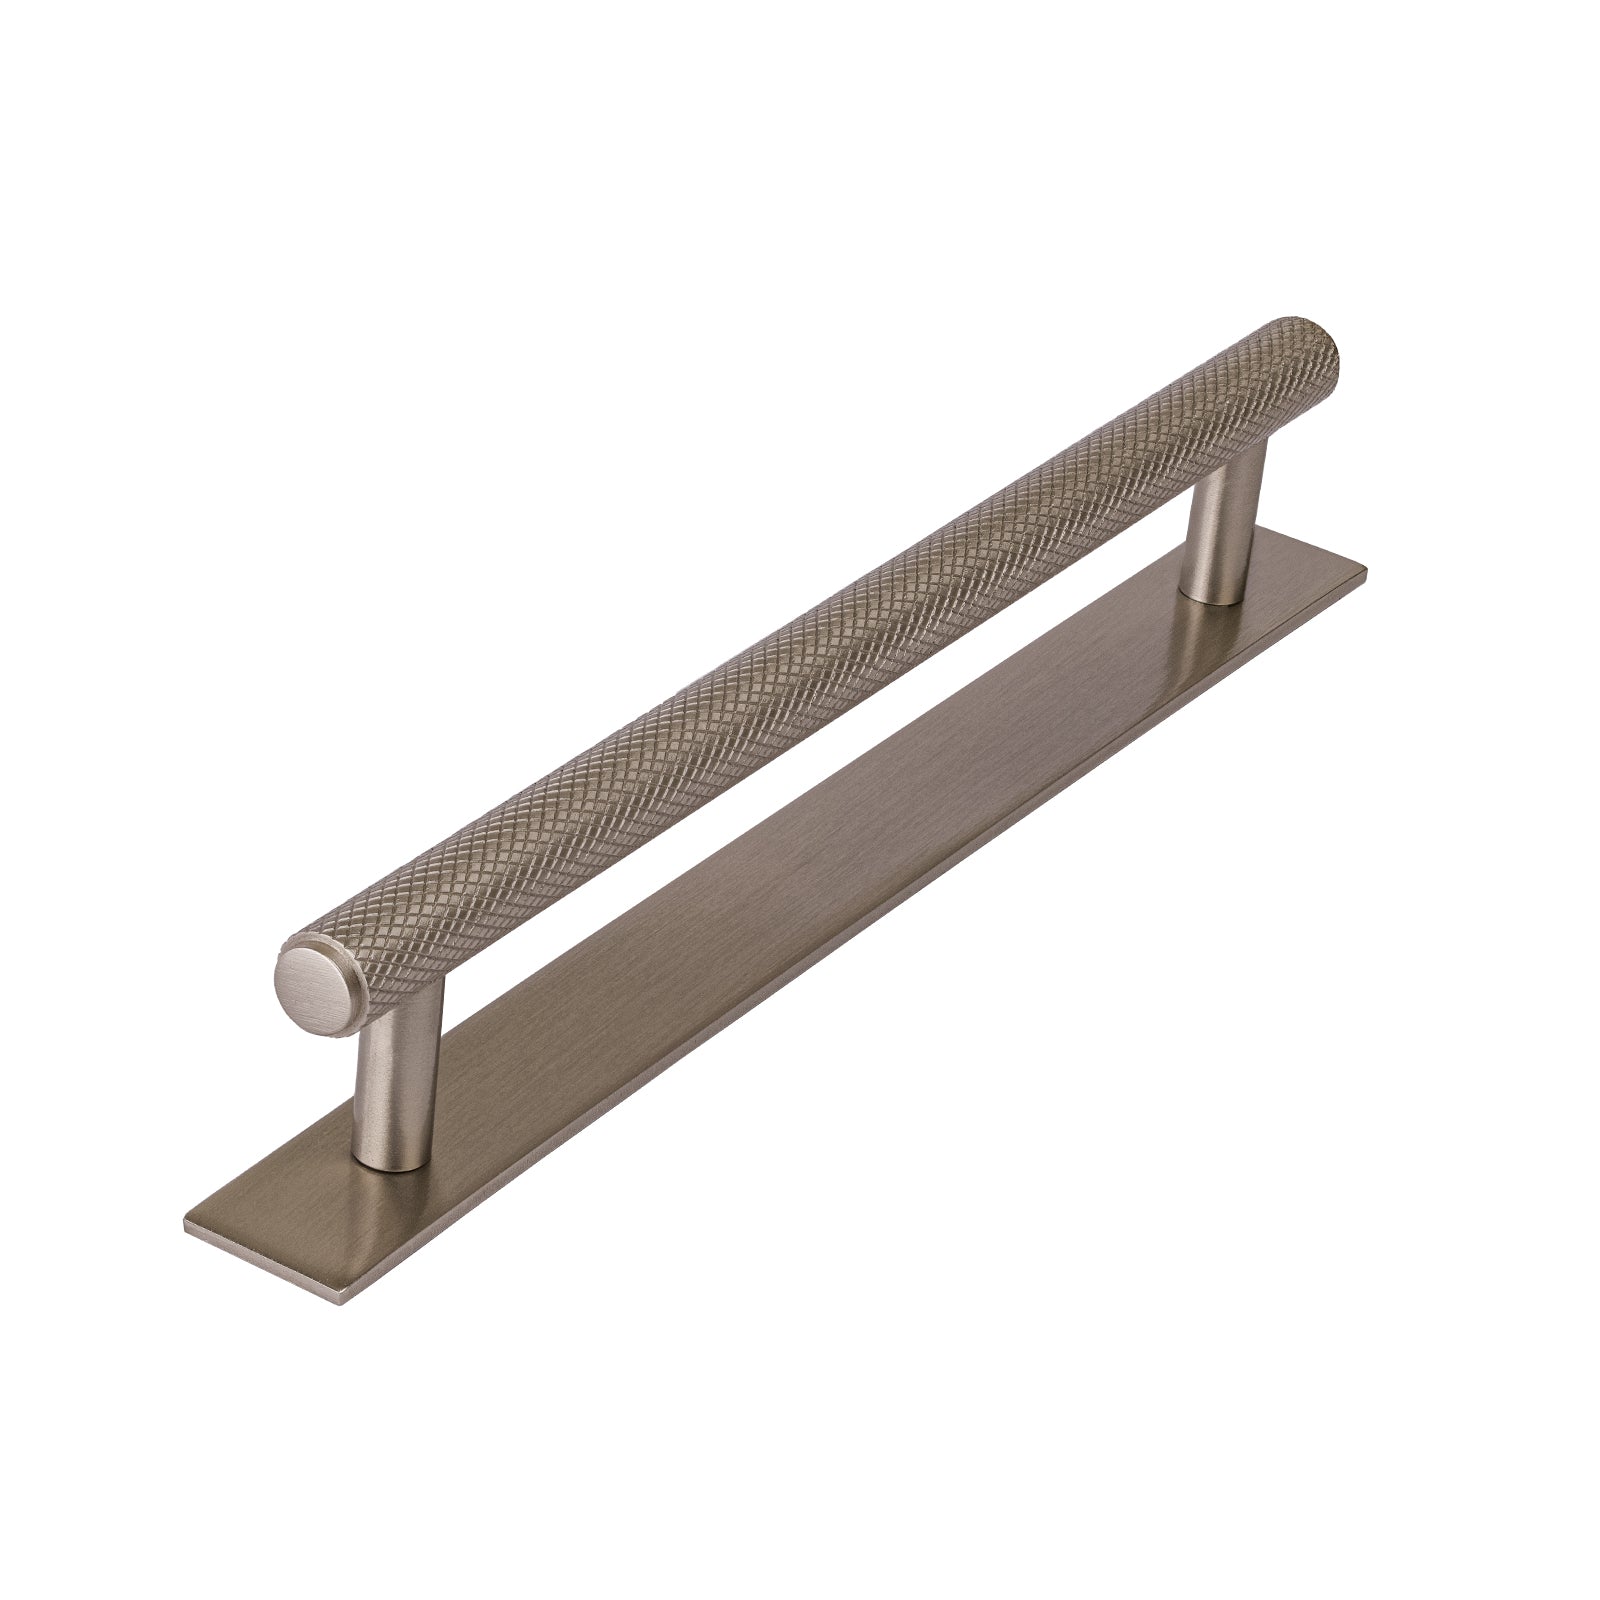 satin nickel cupboard handles, large knurled pull handle, kitchen pull handles on backplate